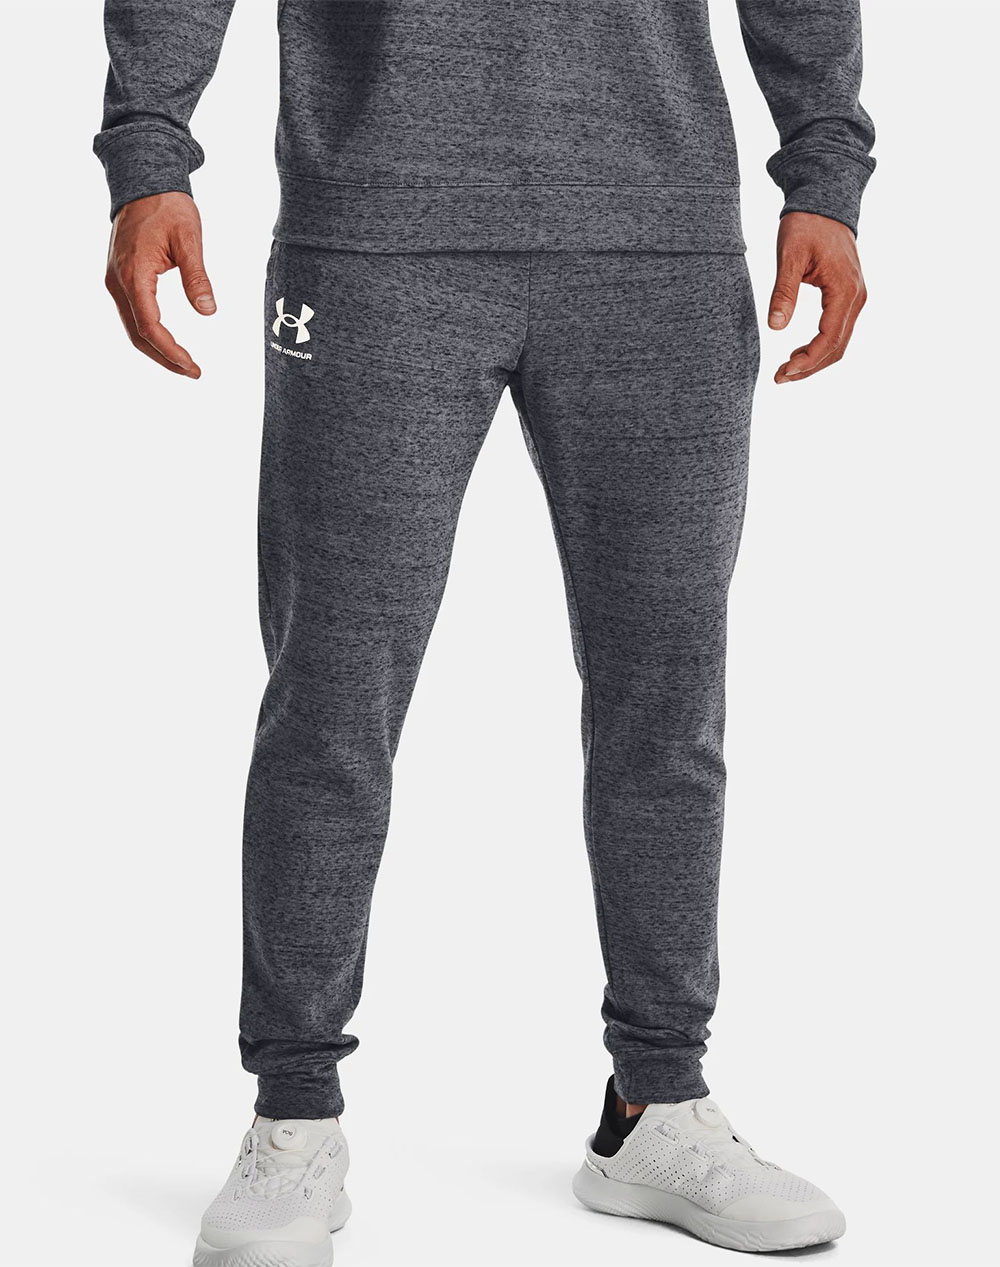 UNDER AMROUR Men”s UA Rival Terry Joggers 1380843-9999 Gray